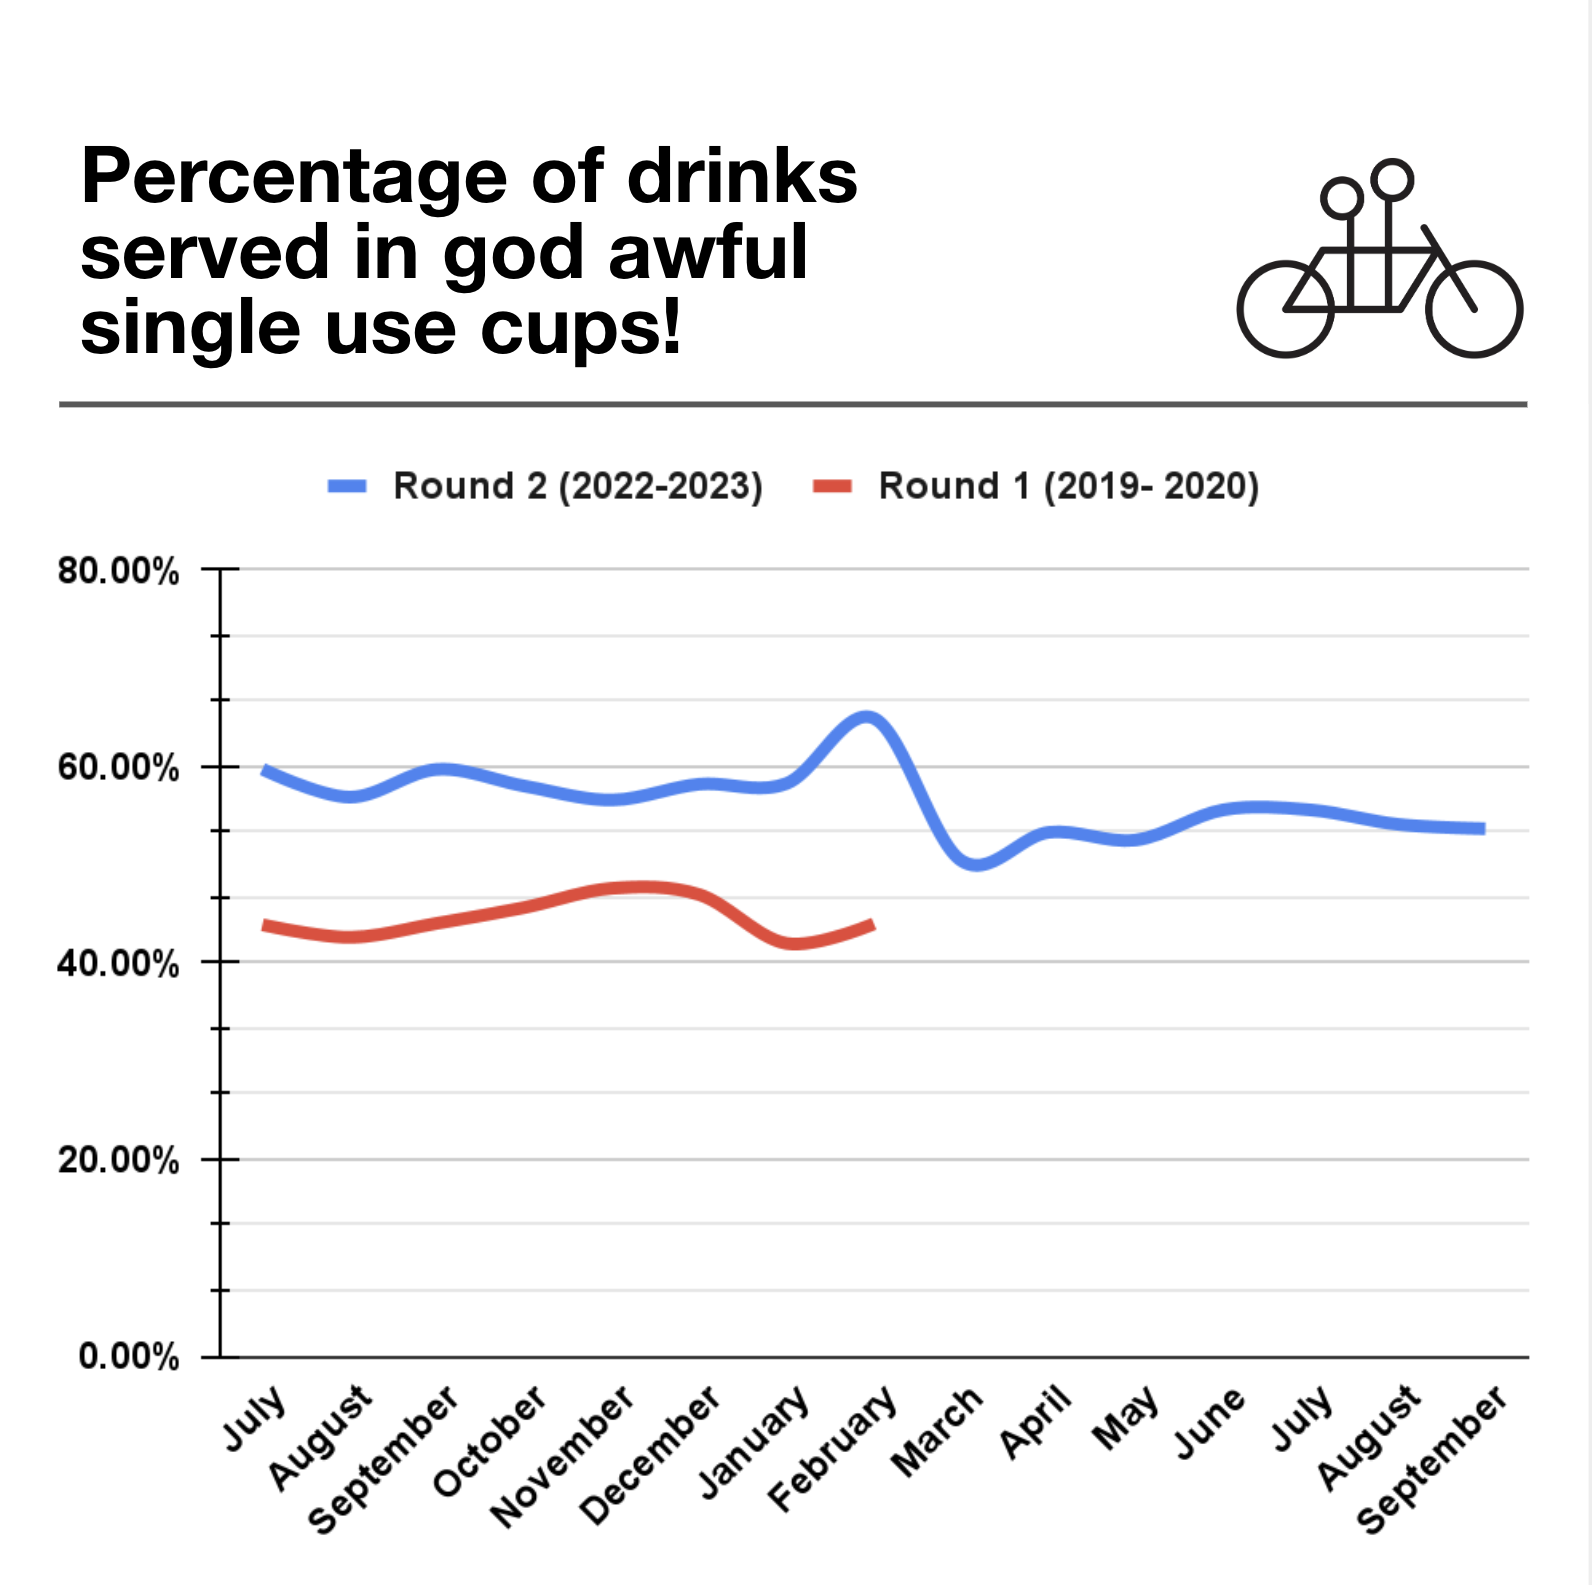 Line graph titled "percentage of drink servings in god awful round 1 (2019-2020) and round 2 (2022-2023)," displaying fluctuating percentages over months with icons of a cup and bicycle.